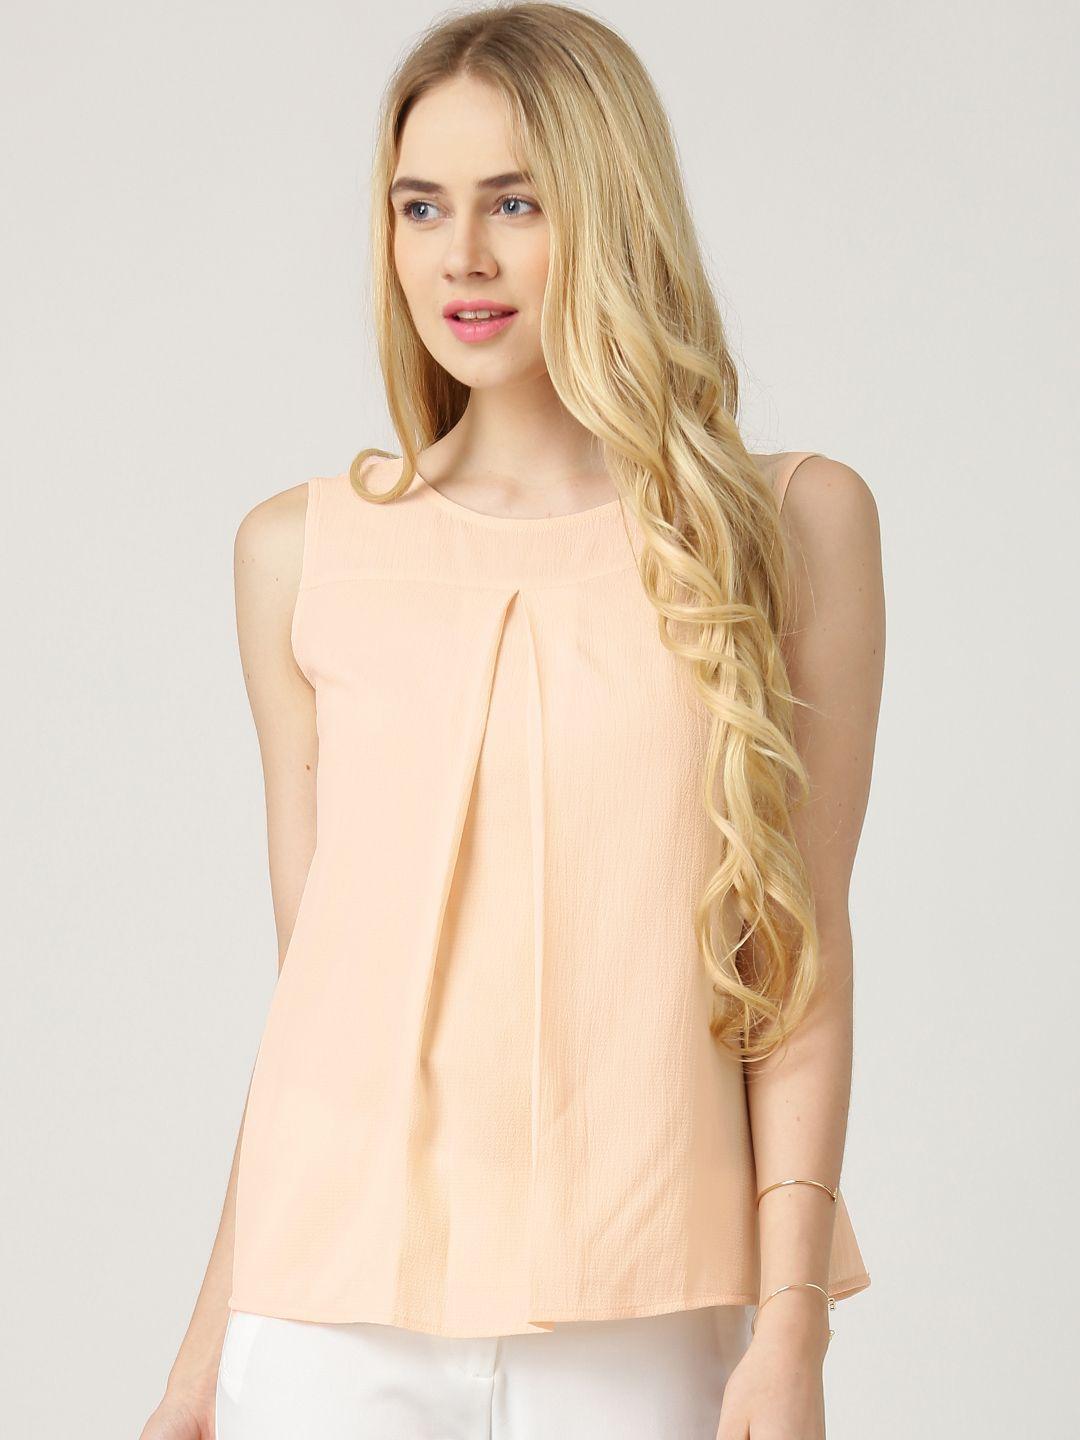 marie claire peach-coloured georgette pleated textured top